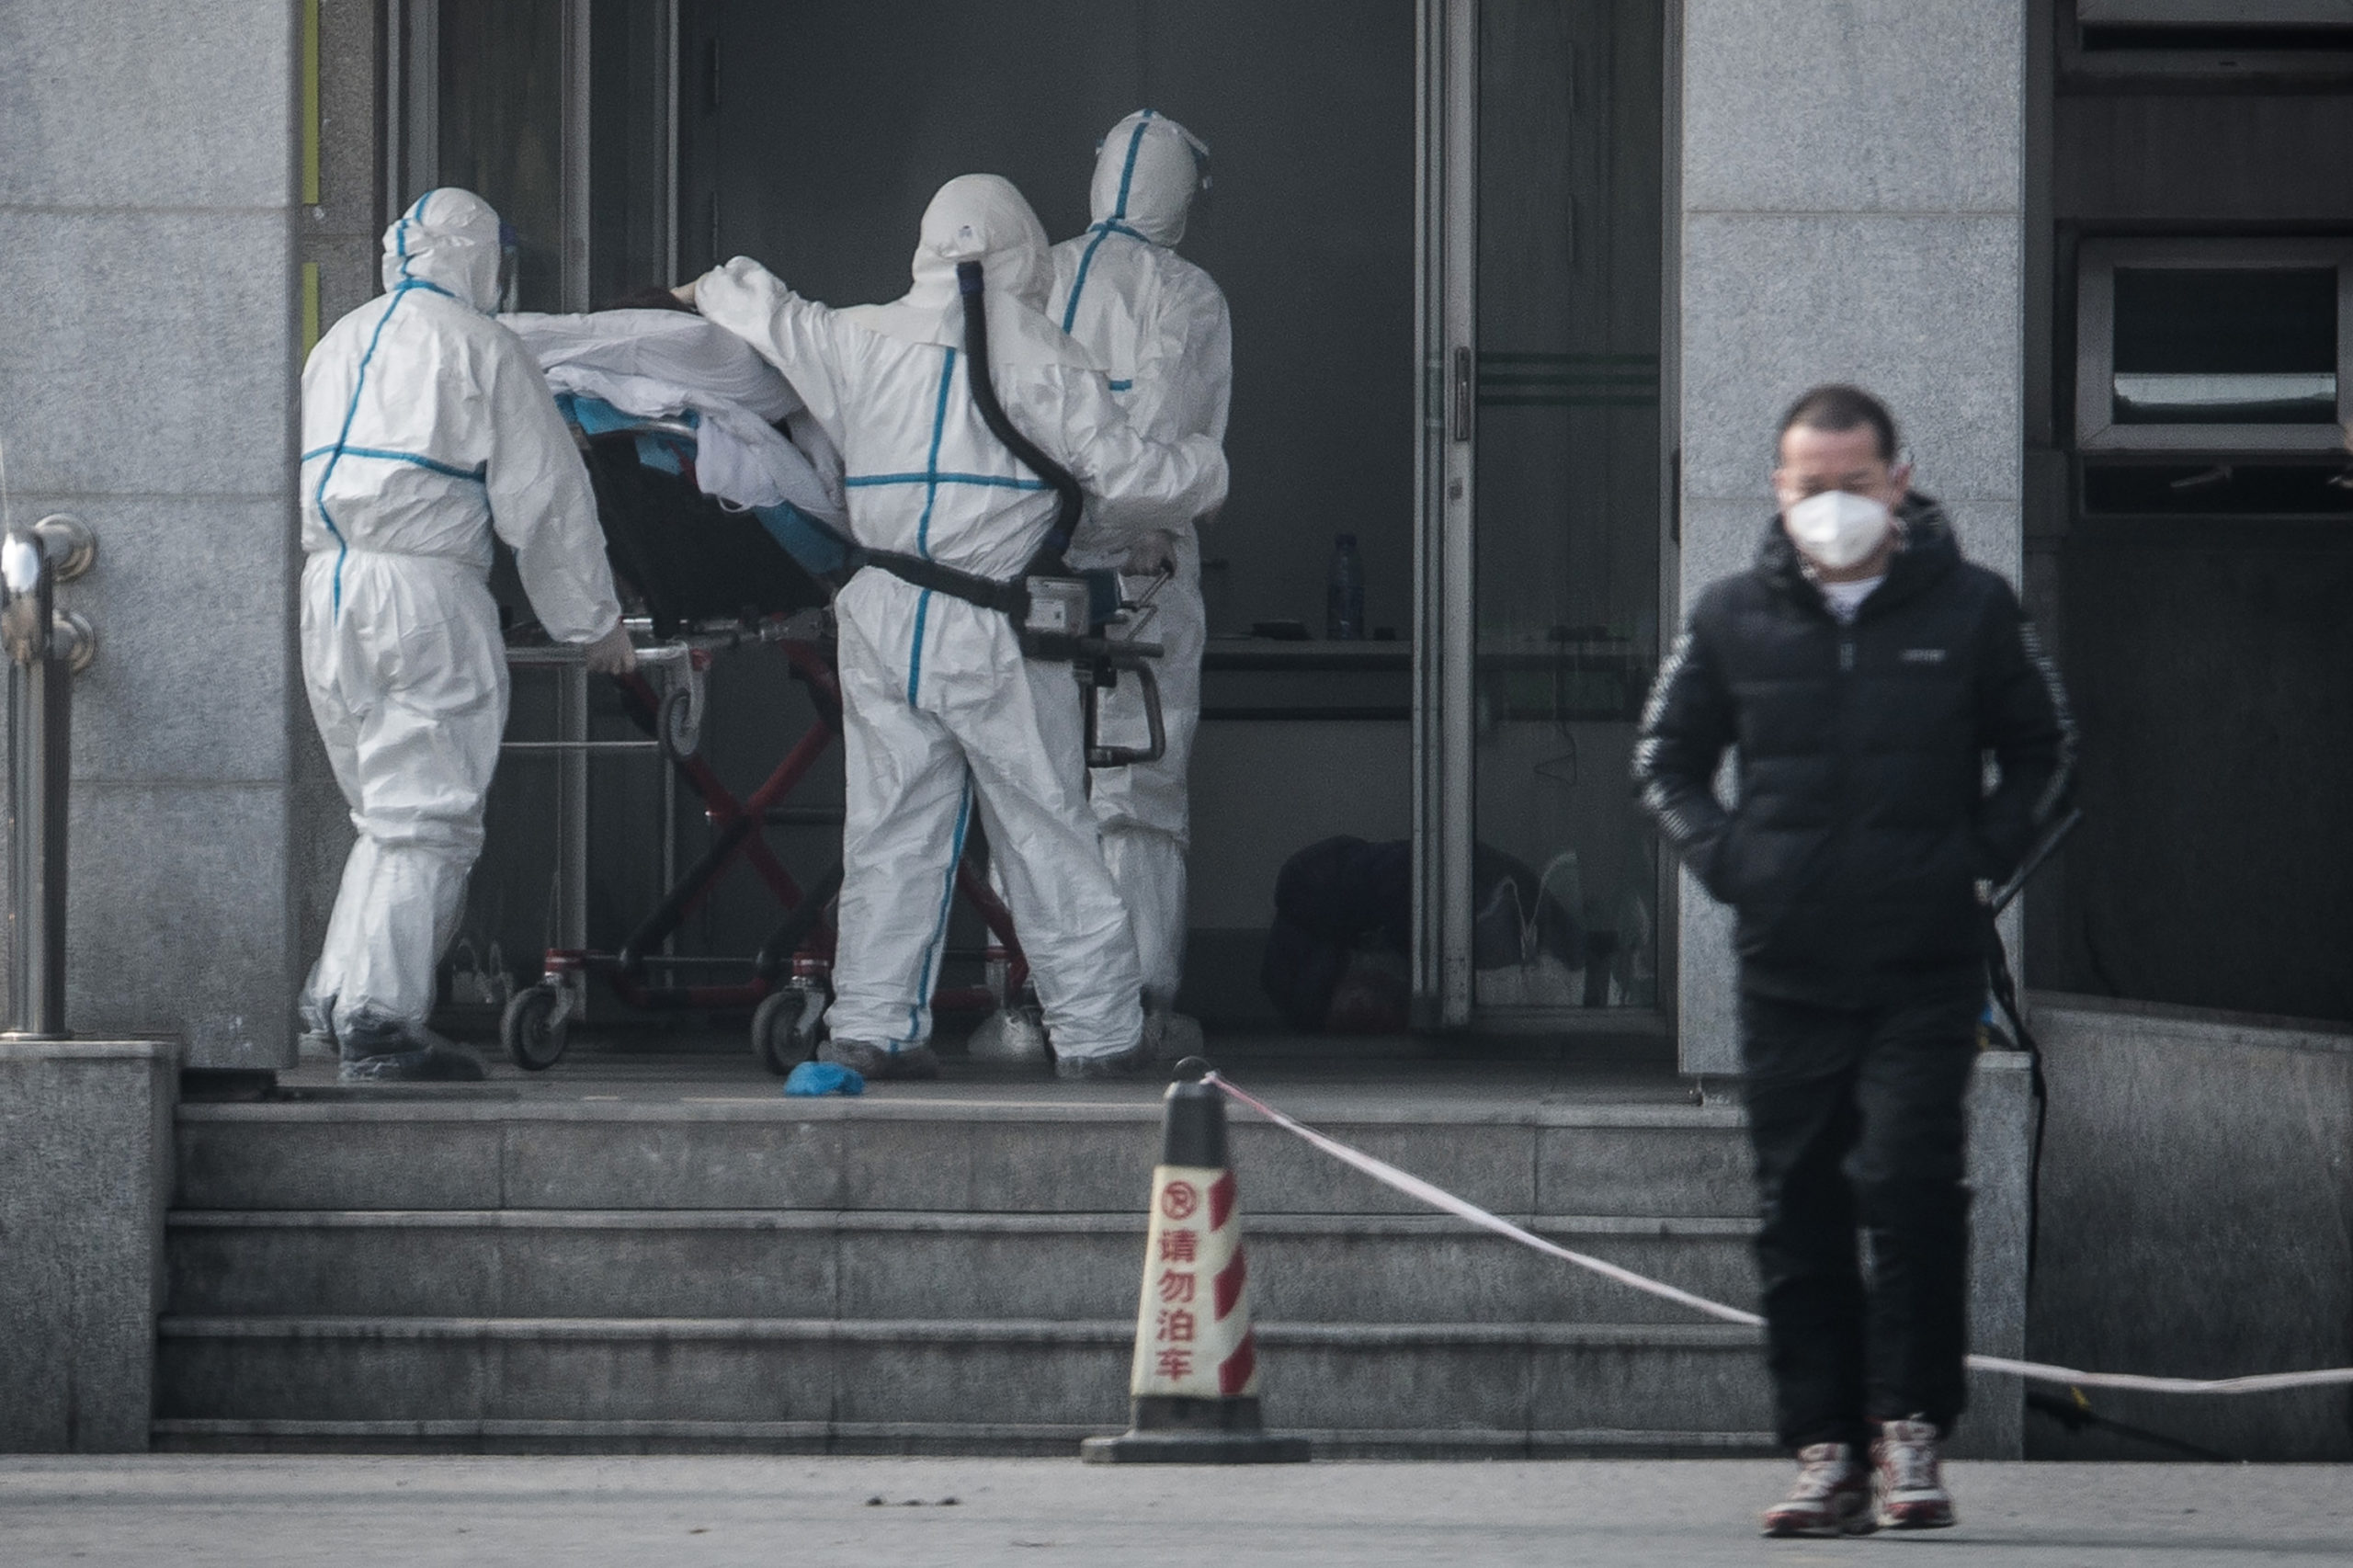 Medical staff members carry a patient into a Chinese hospital where patients infected by a "mysterious SARS-like virus" were treated in Wuhan, China on Jan. 18, 2020. (STR/AFP via Getty Images)